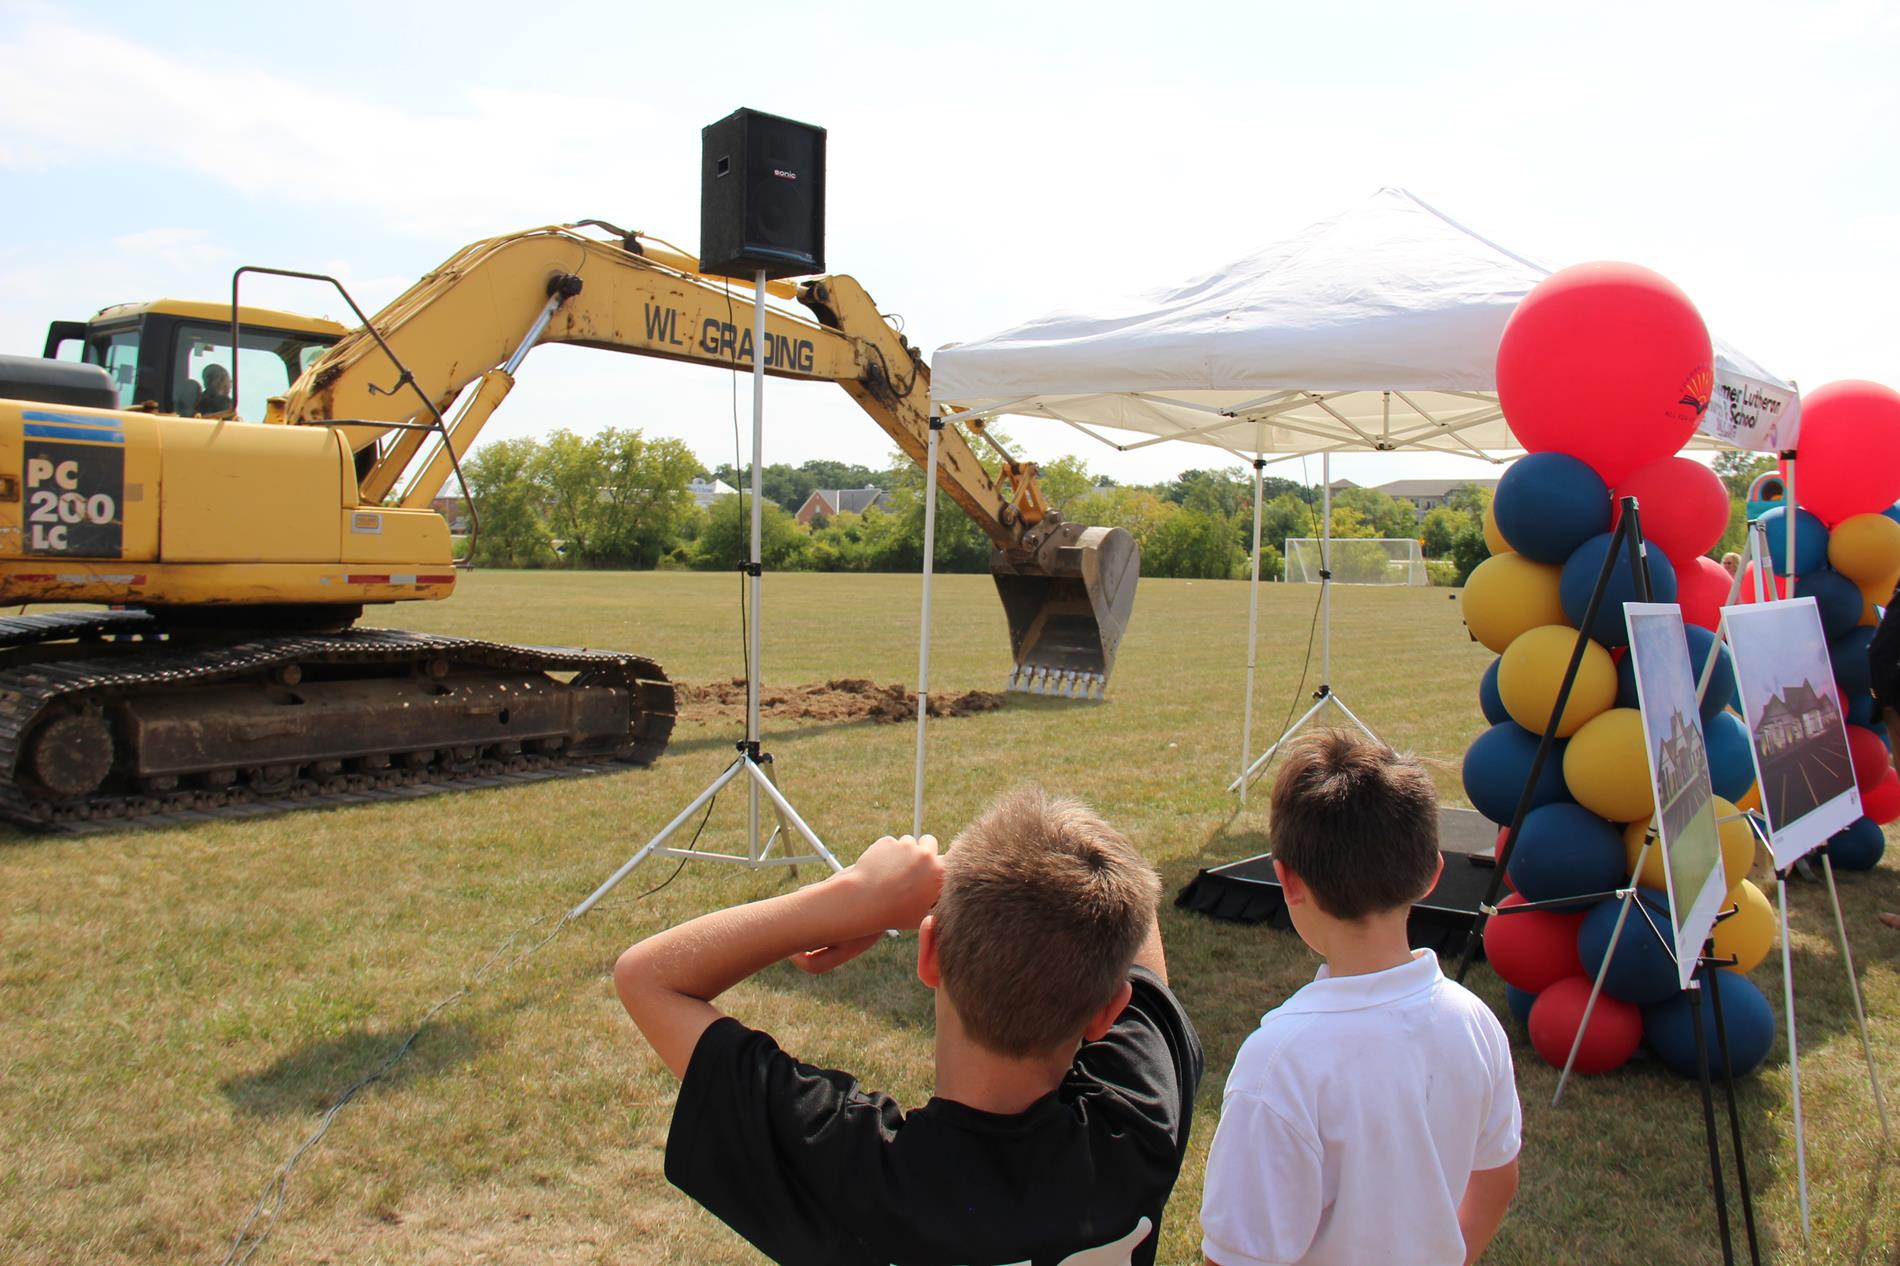 Kids (and adults) loved watching the excavator